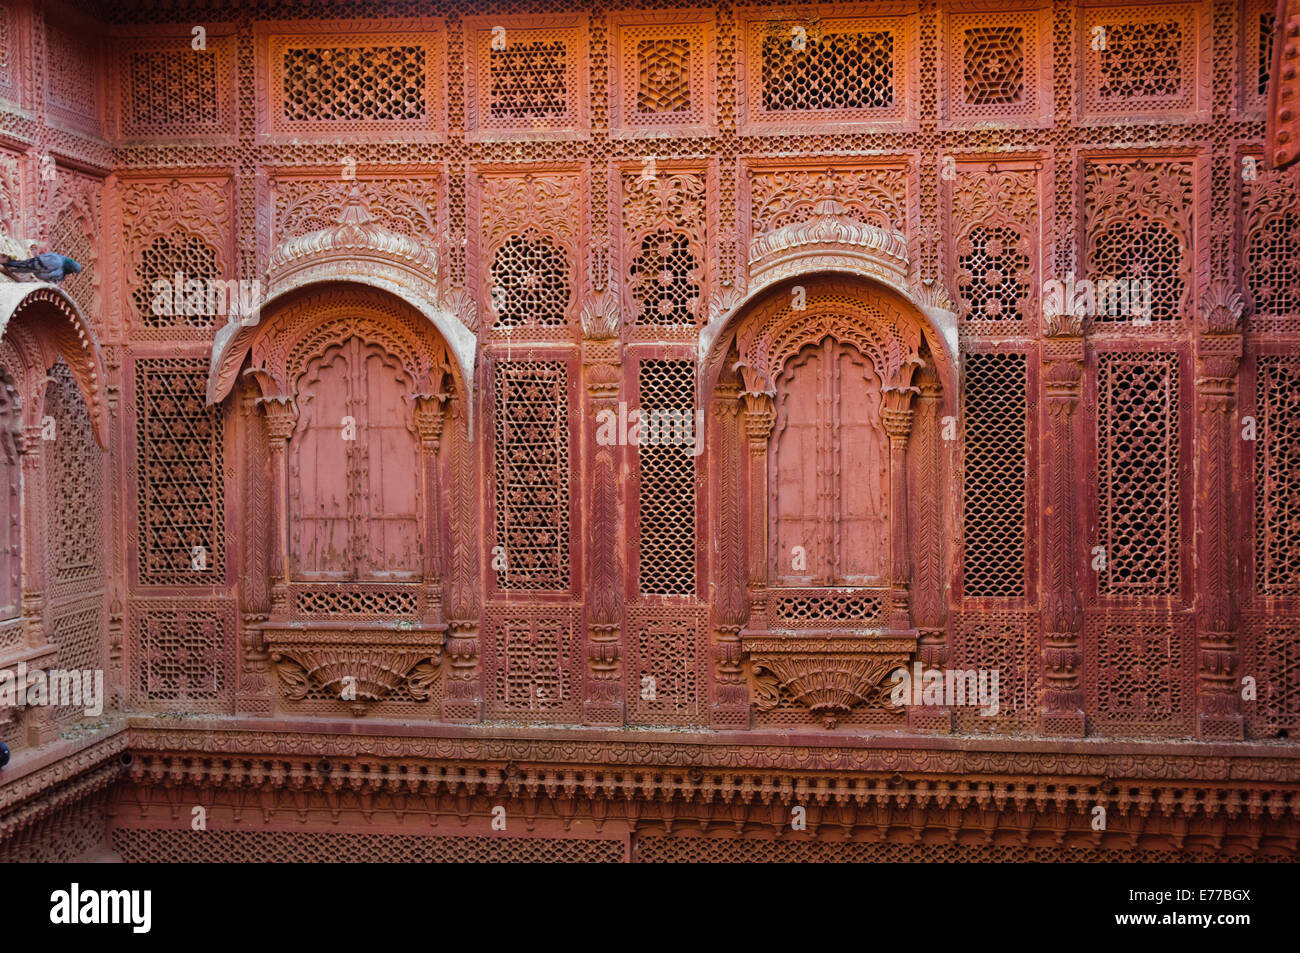 Intricately carved walls allow women in purdah to look out, Mehrangarh Fort, Jodhpur, Rajasthan, India. Stock Photo